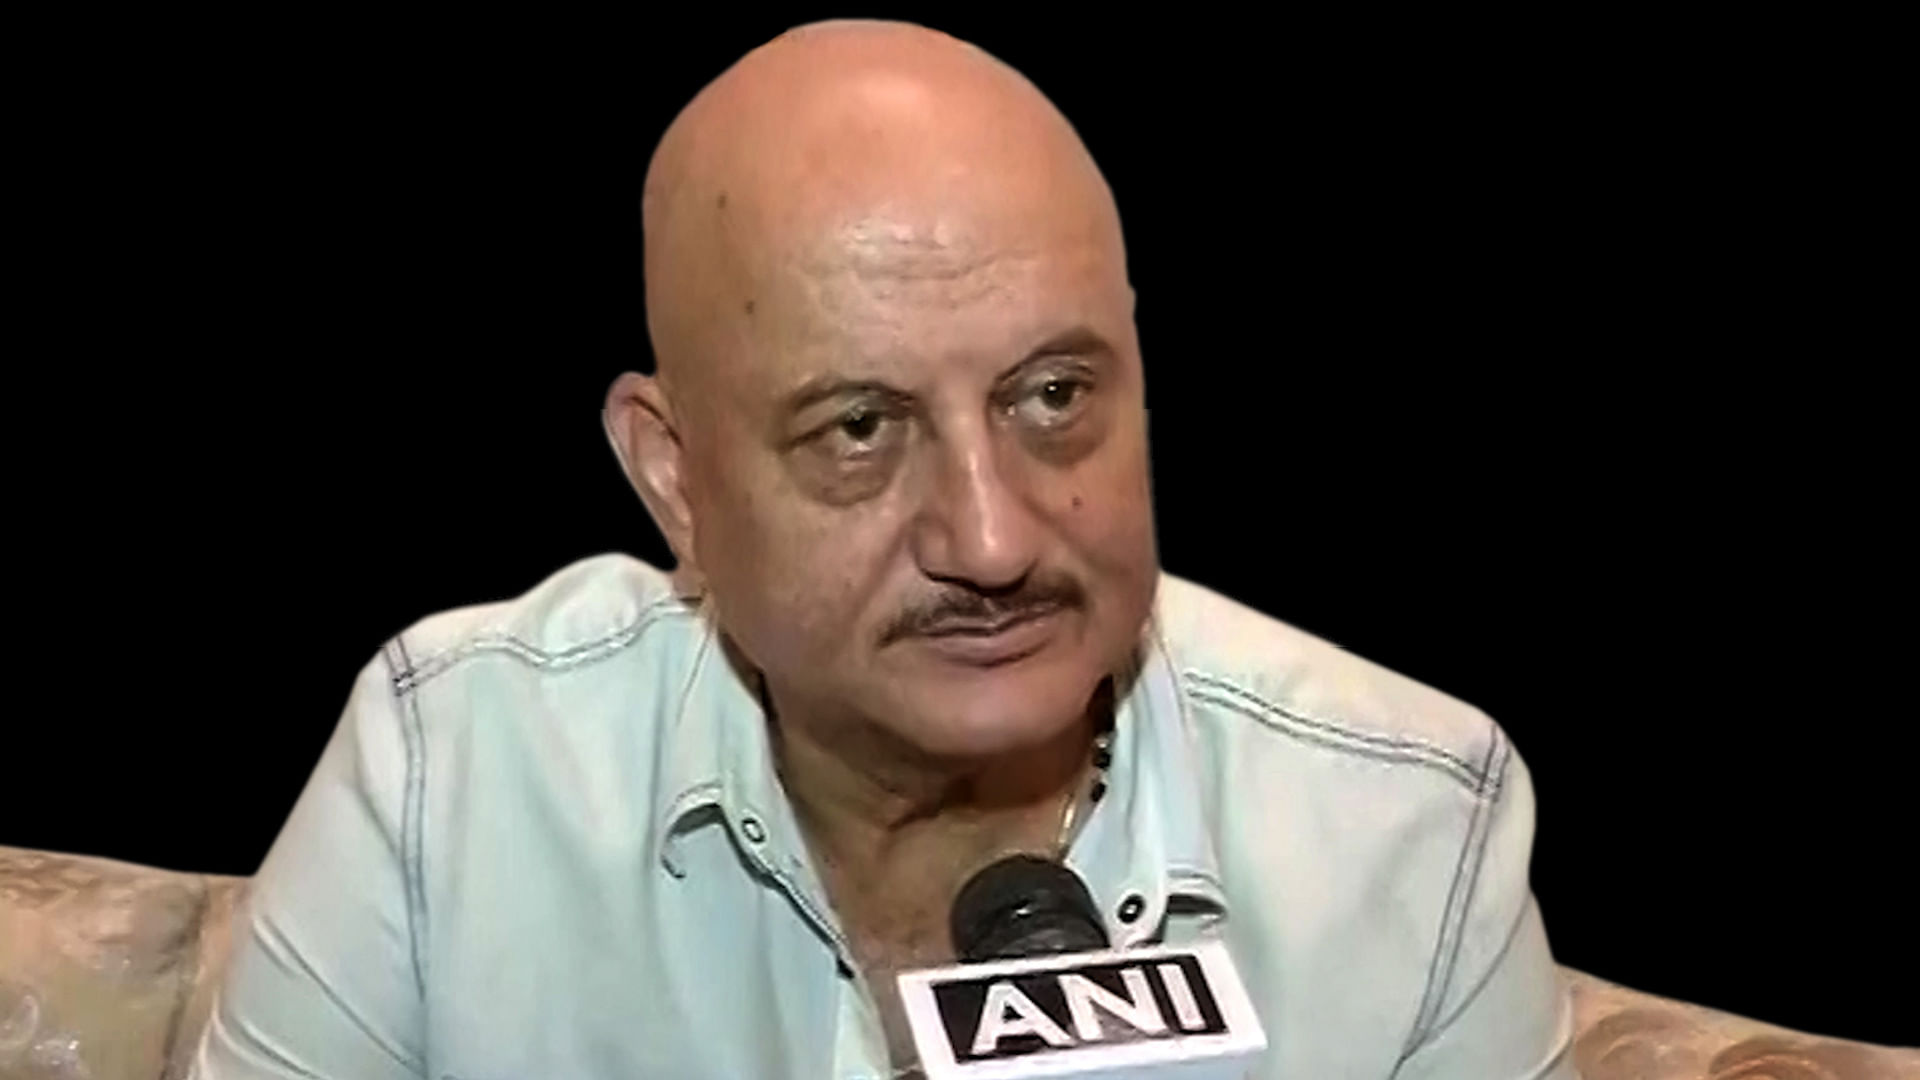 Actor Anupam Kher speaks about writers returning their awards. (Photo: ANI screengrab)